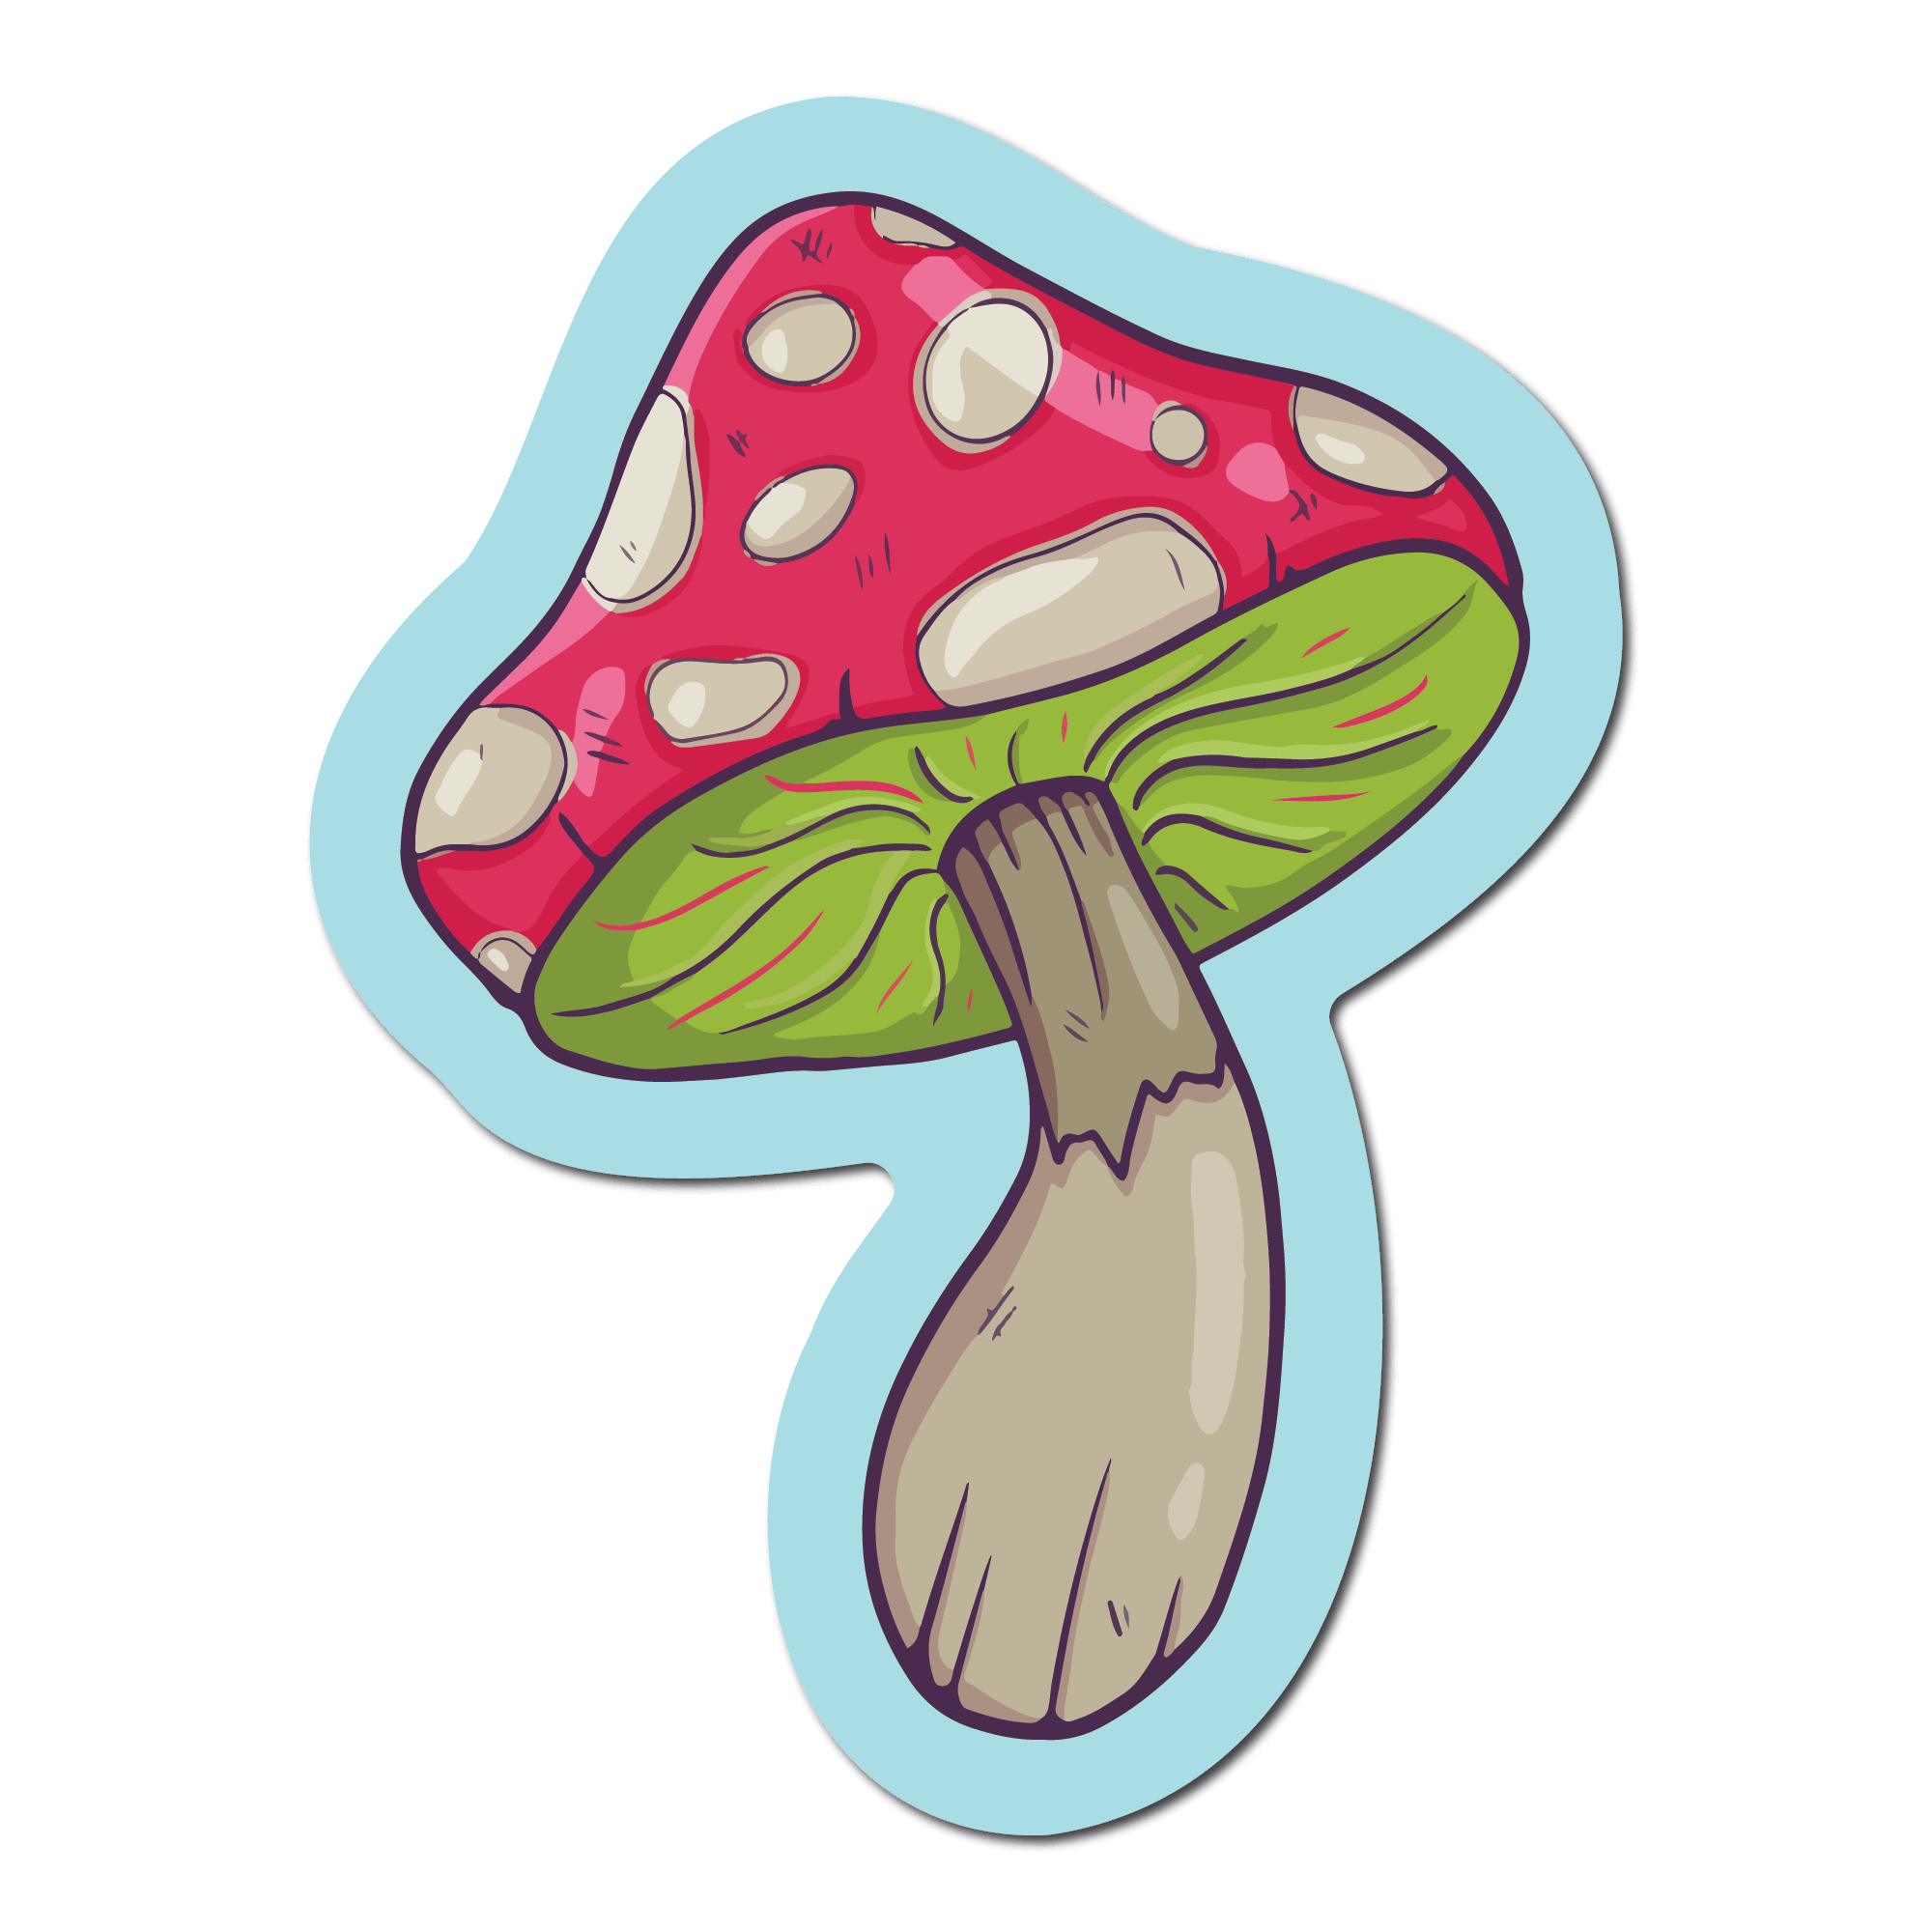 Small Sticker of a red and green mushroom